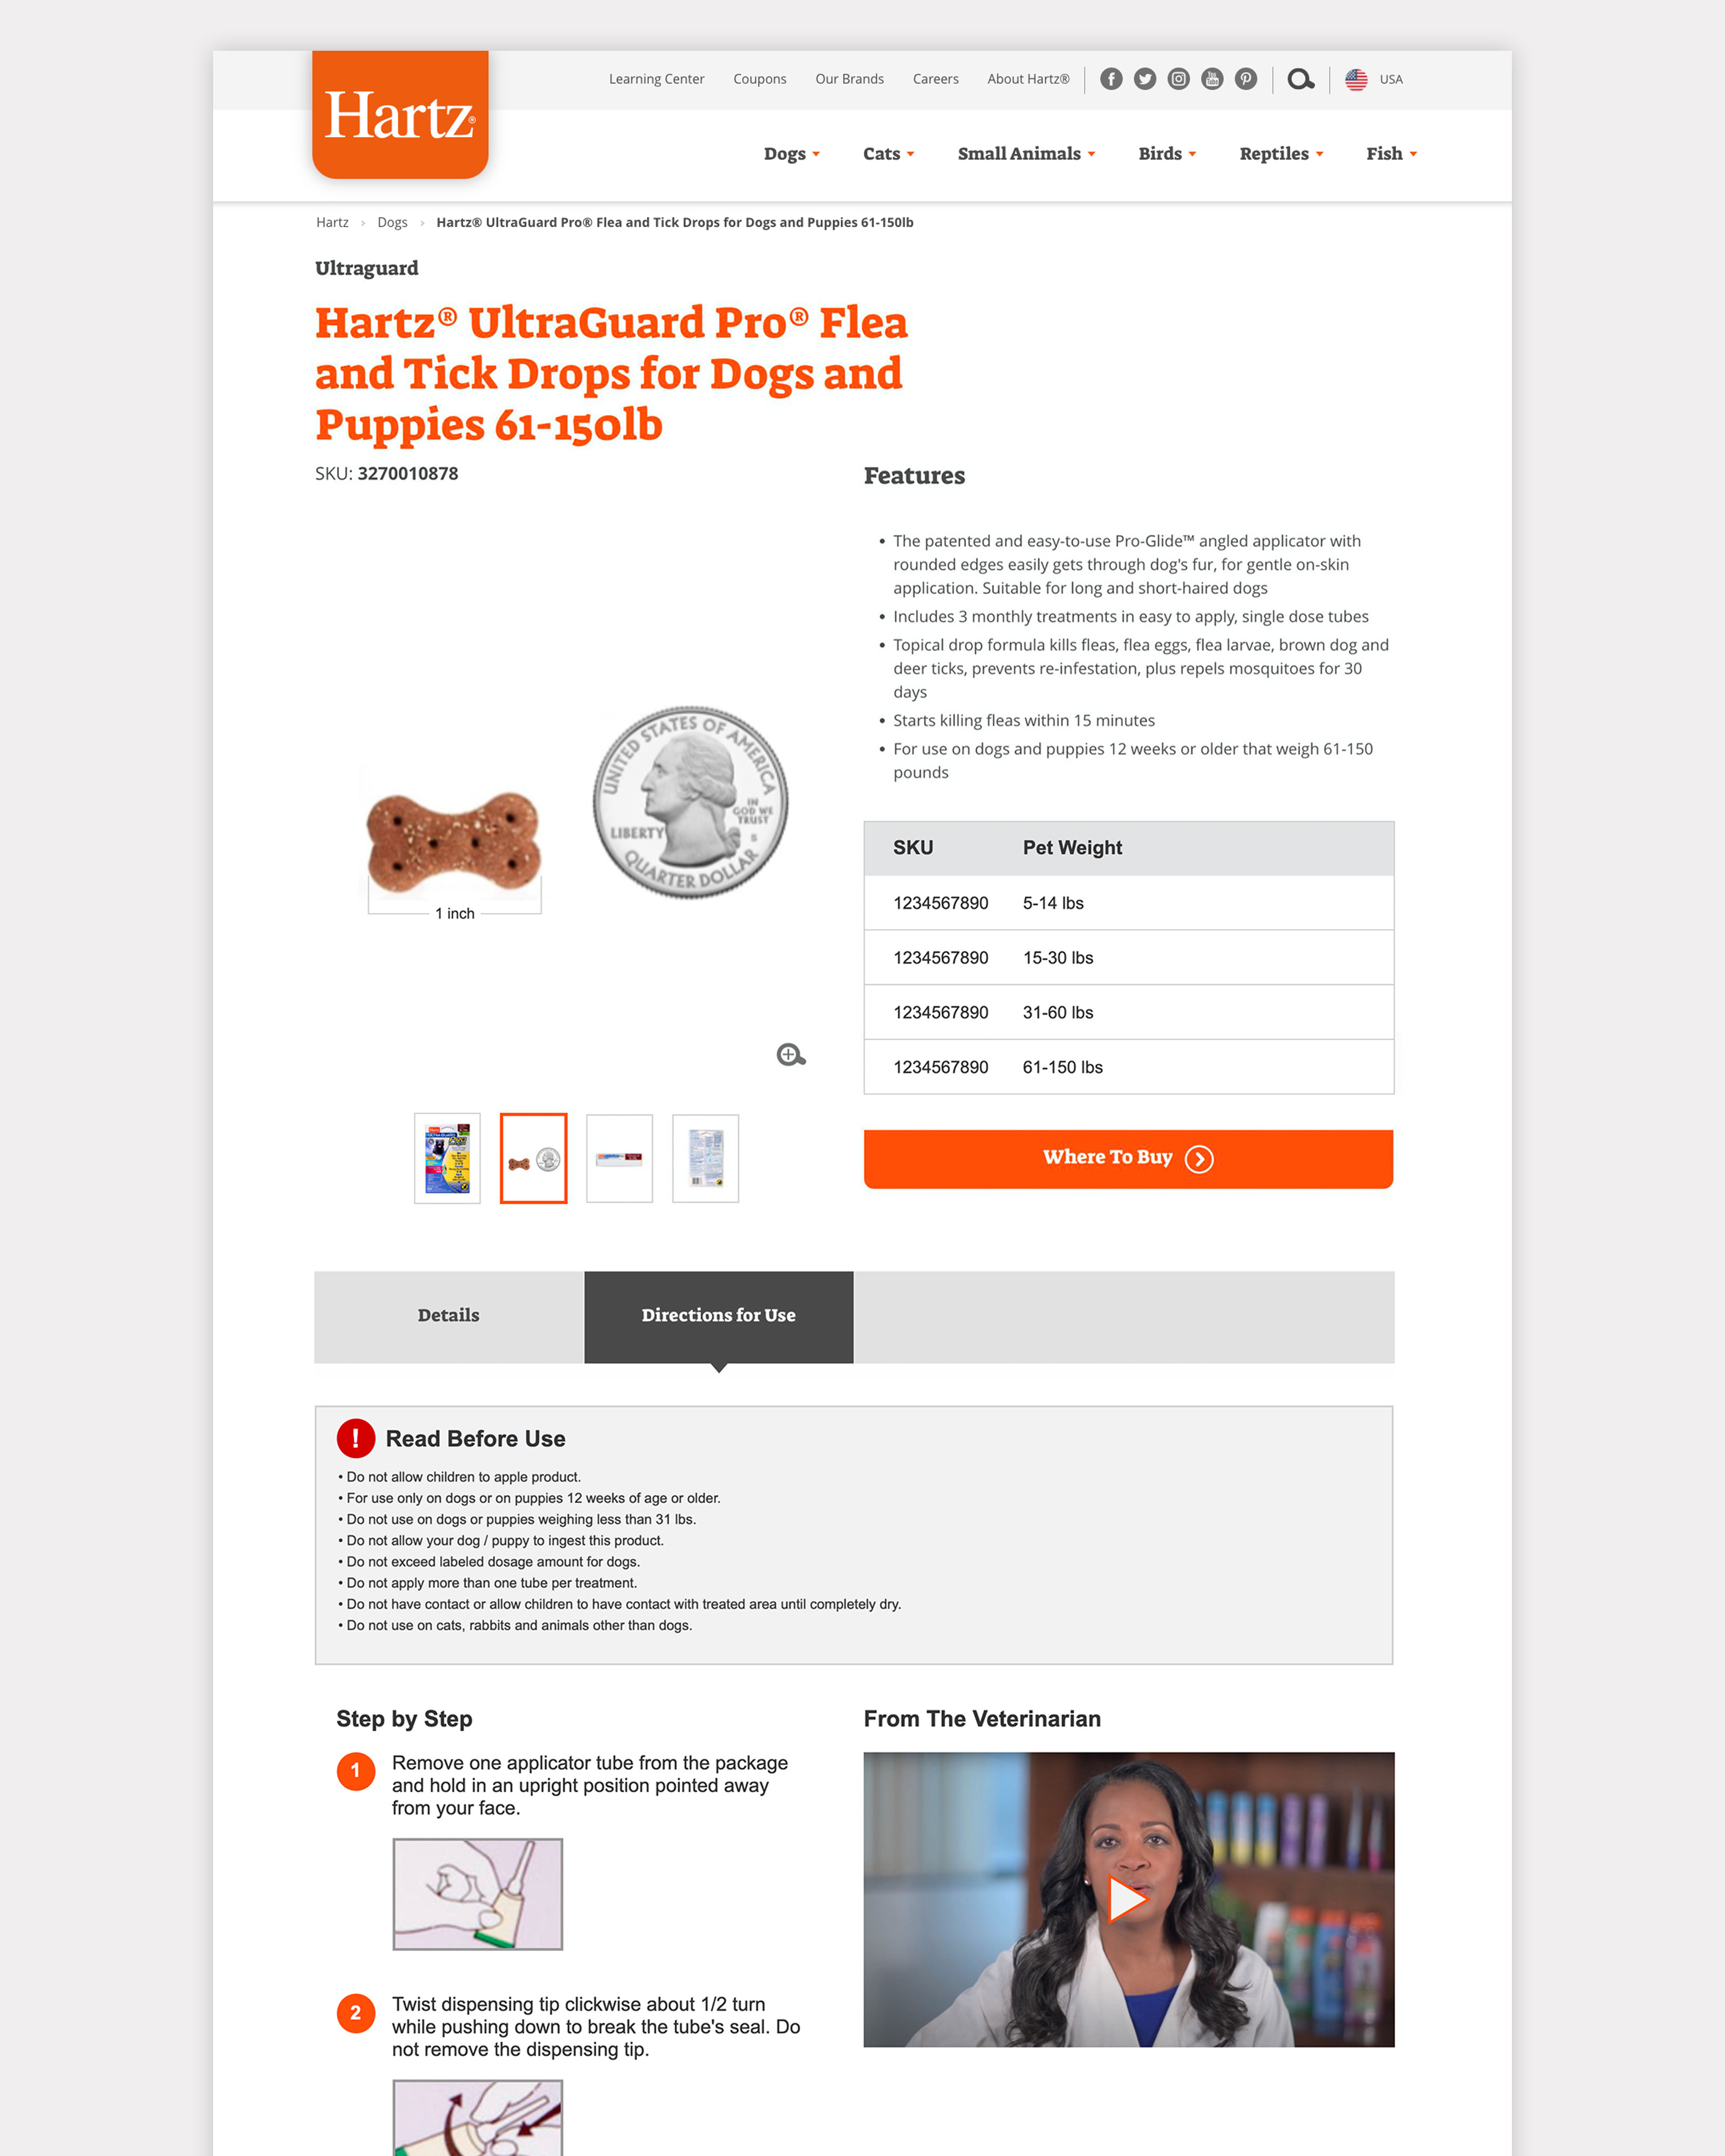 Product detail page showing a dog treat next to a quarter coin for quick size reference. Step by step diagrams showing how to apply product.